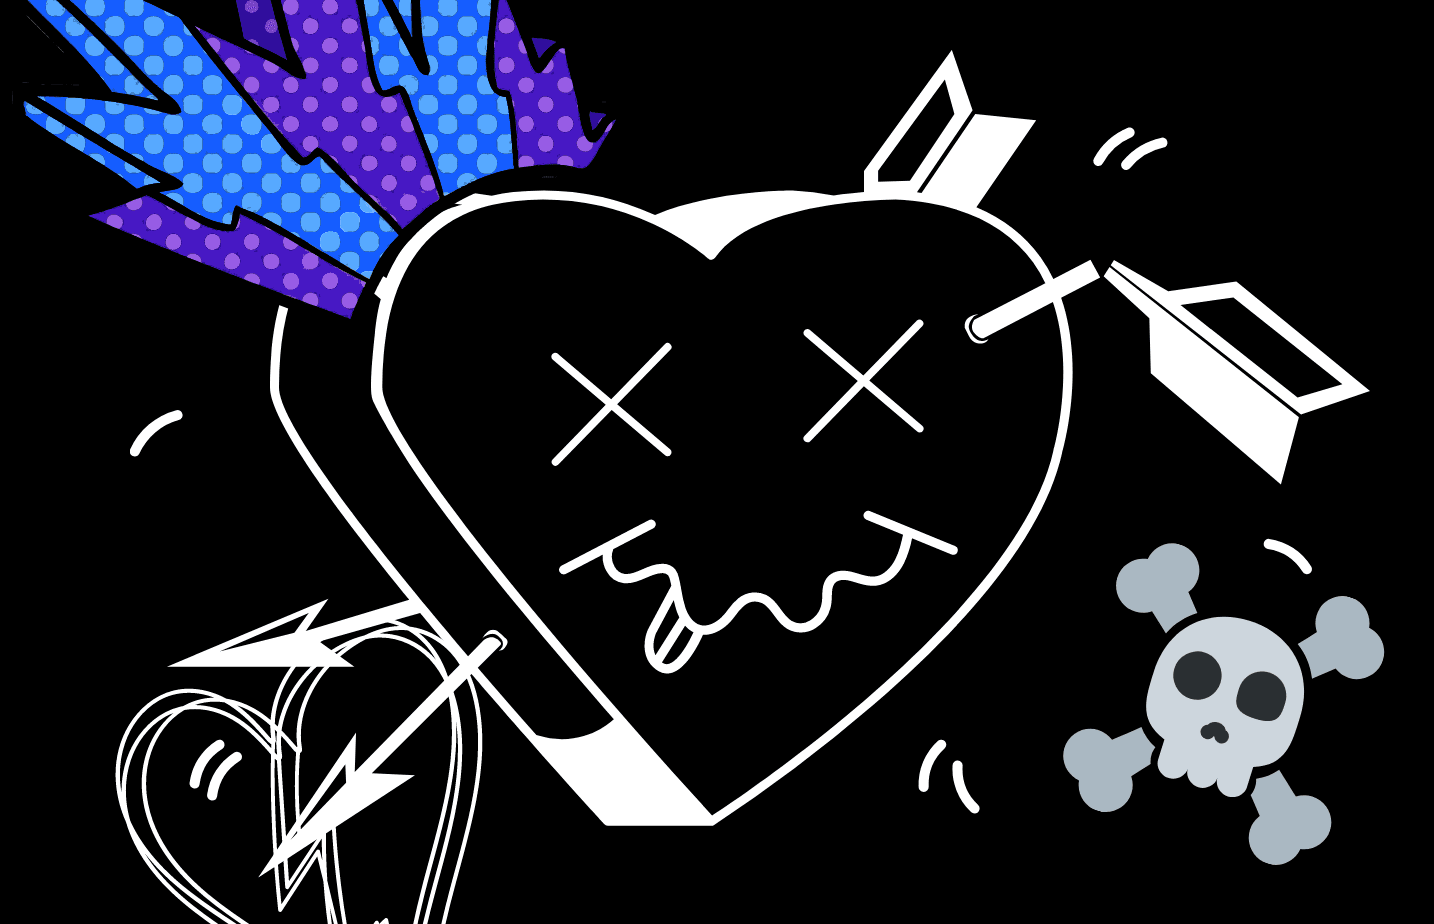 Black Heart Shape with a dead smiley face